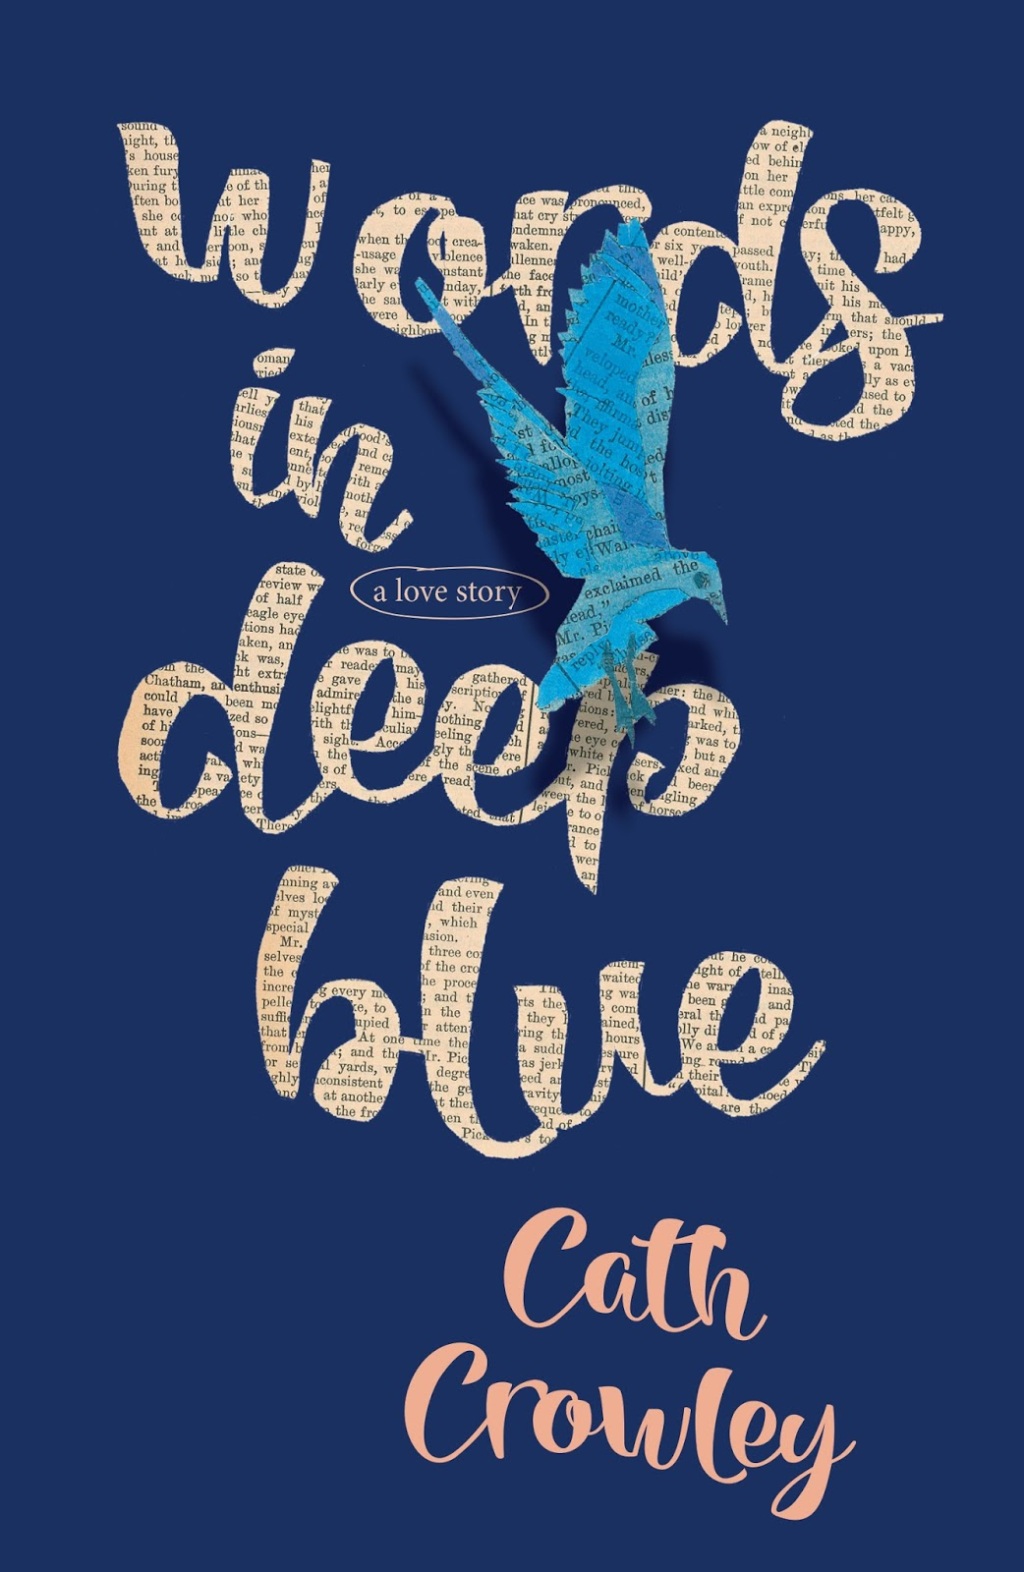 Words in Deep Blue by Cath Crowley book cover